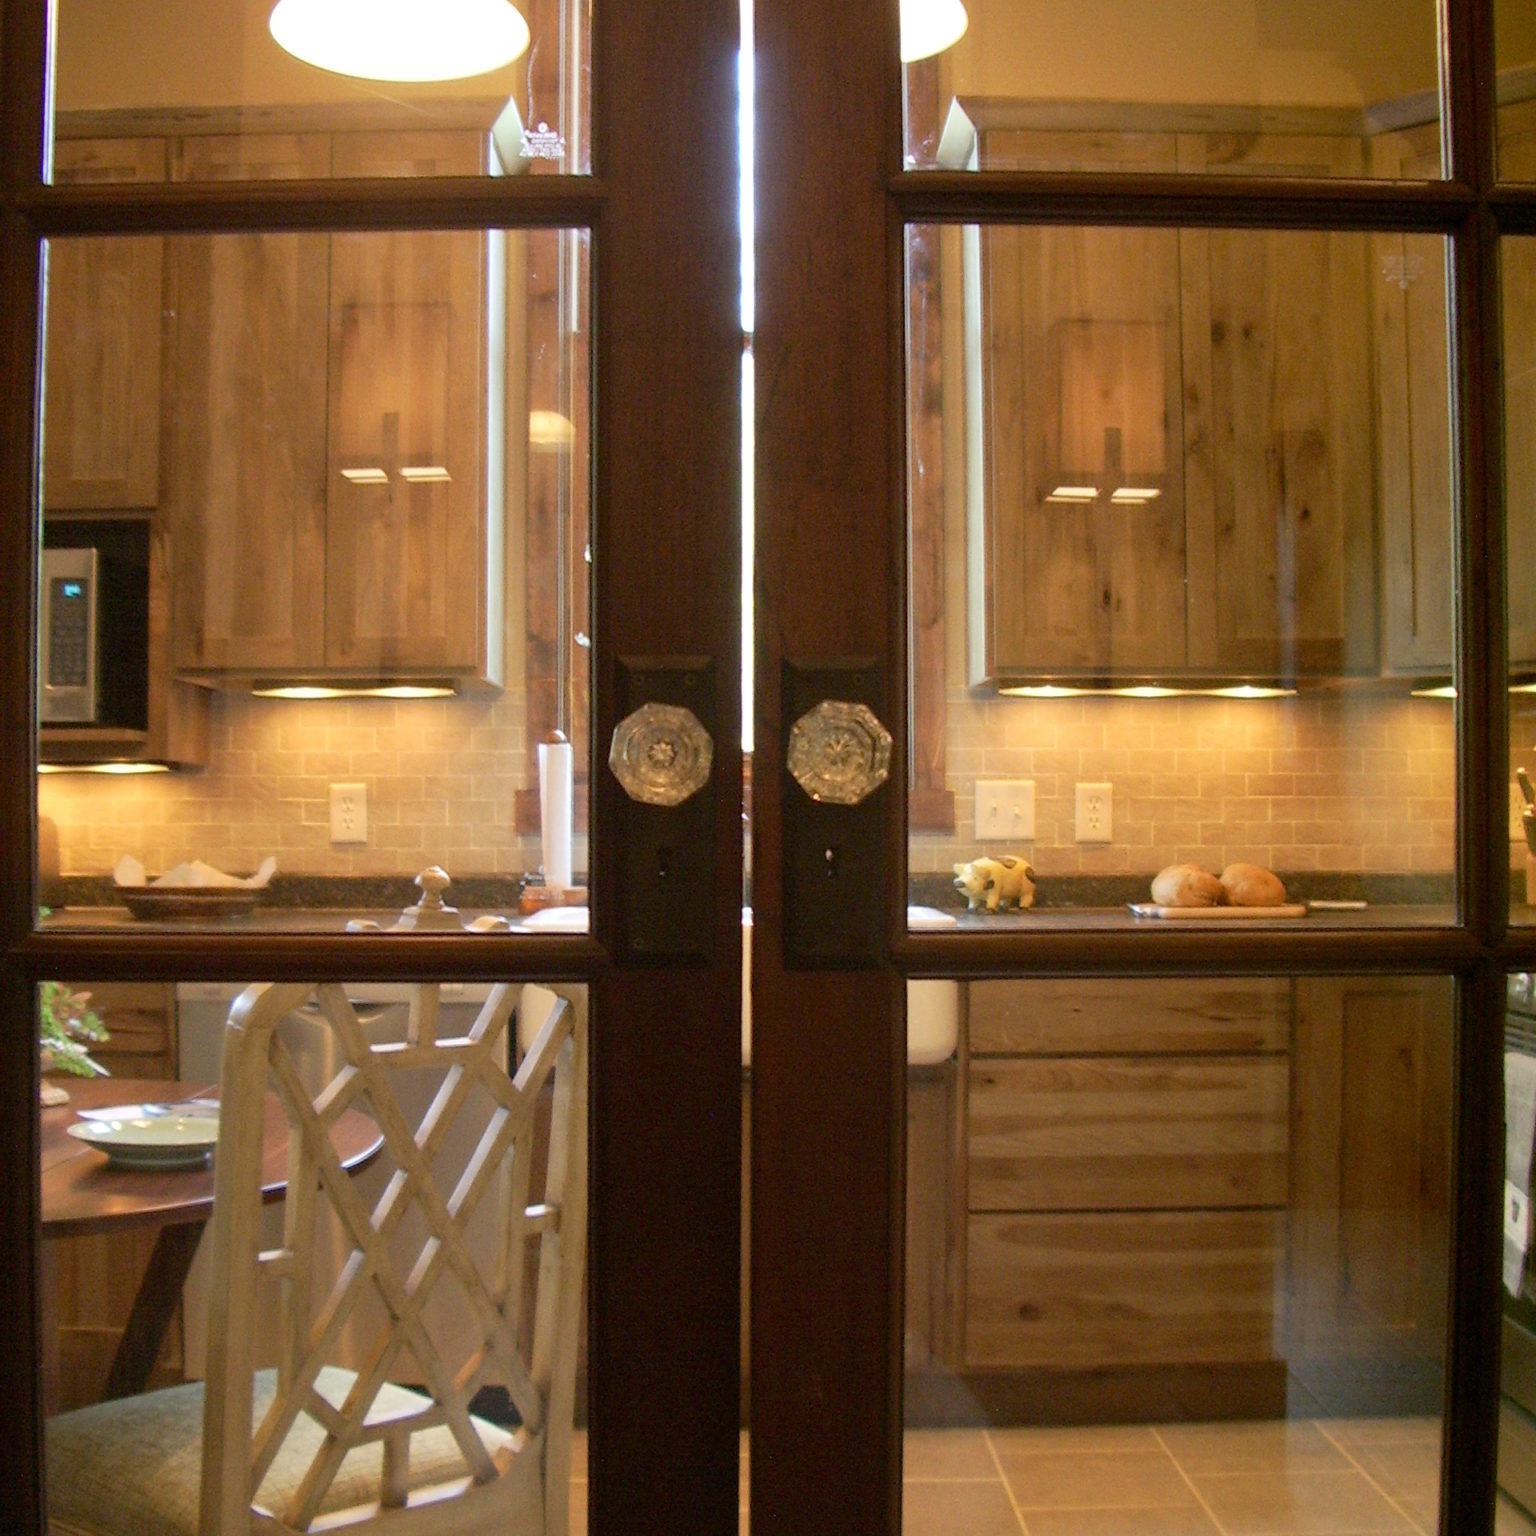 Two glass doors leasing into a rustic kitchen